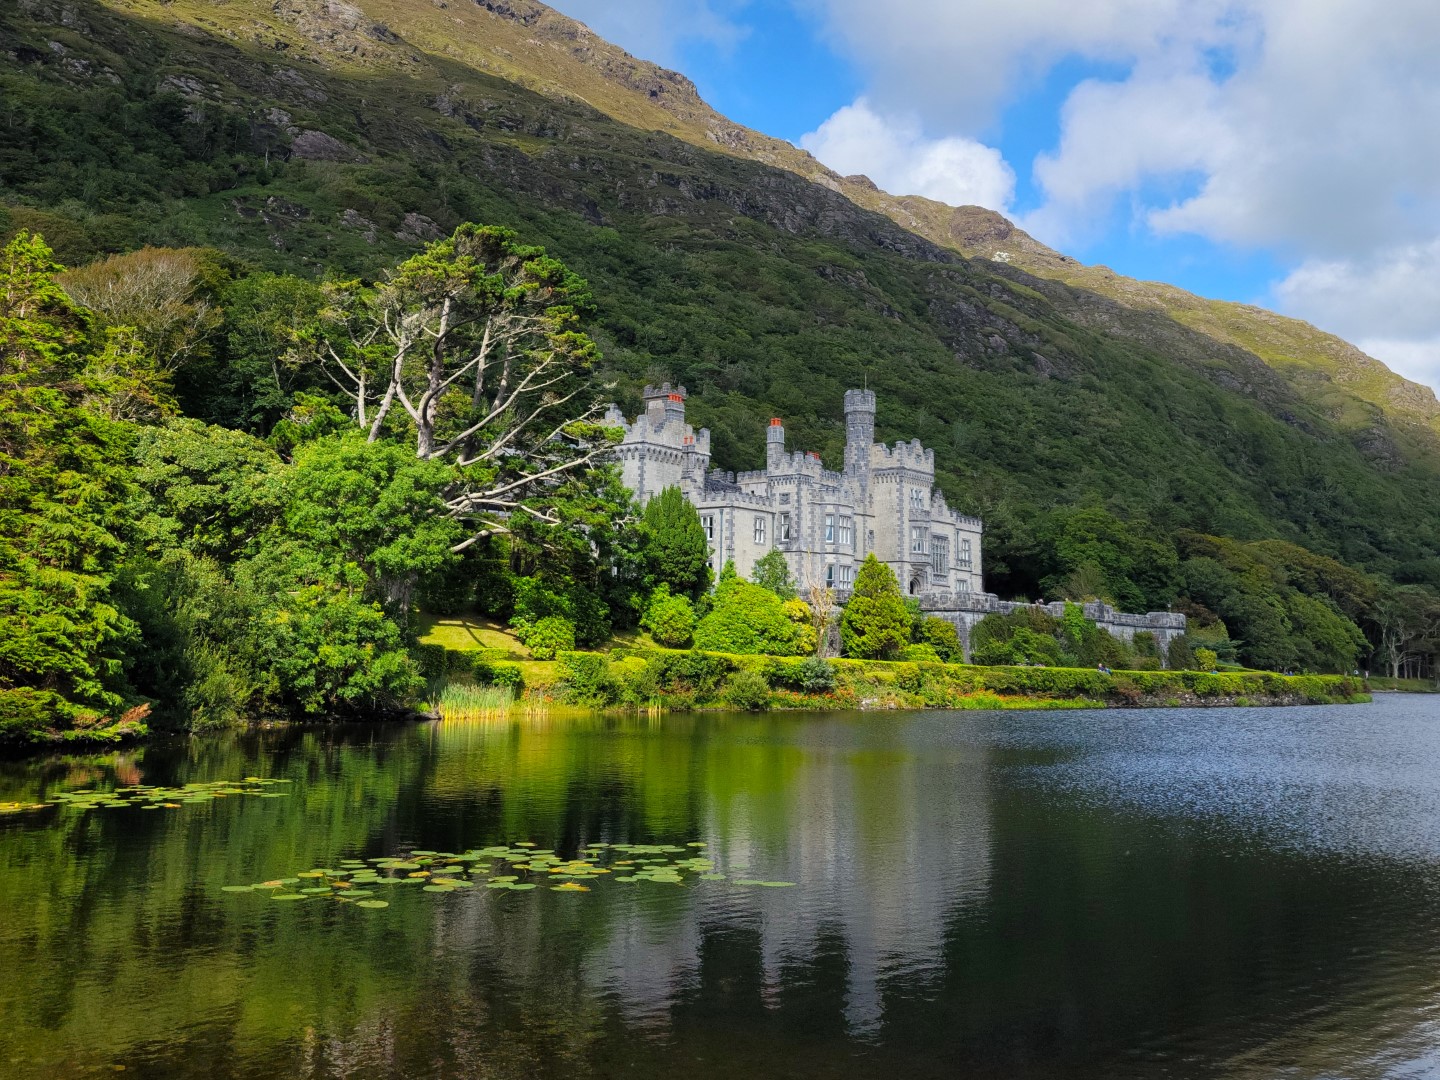 Kylemore Abbey on a clear day